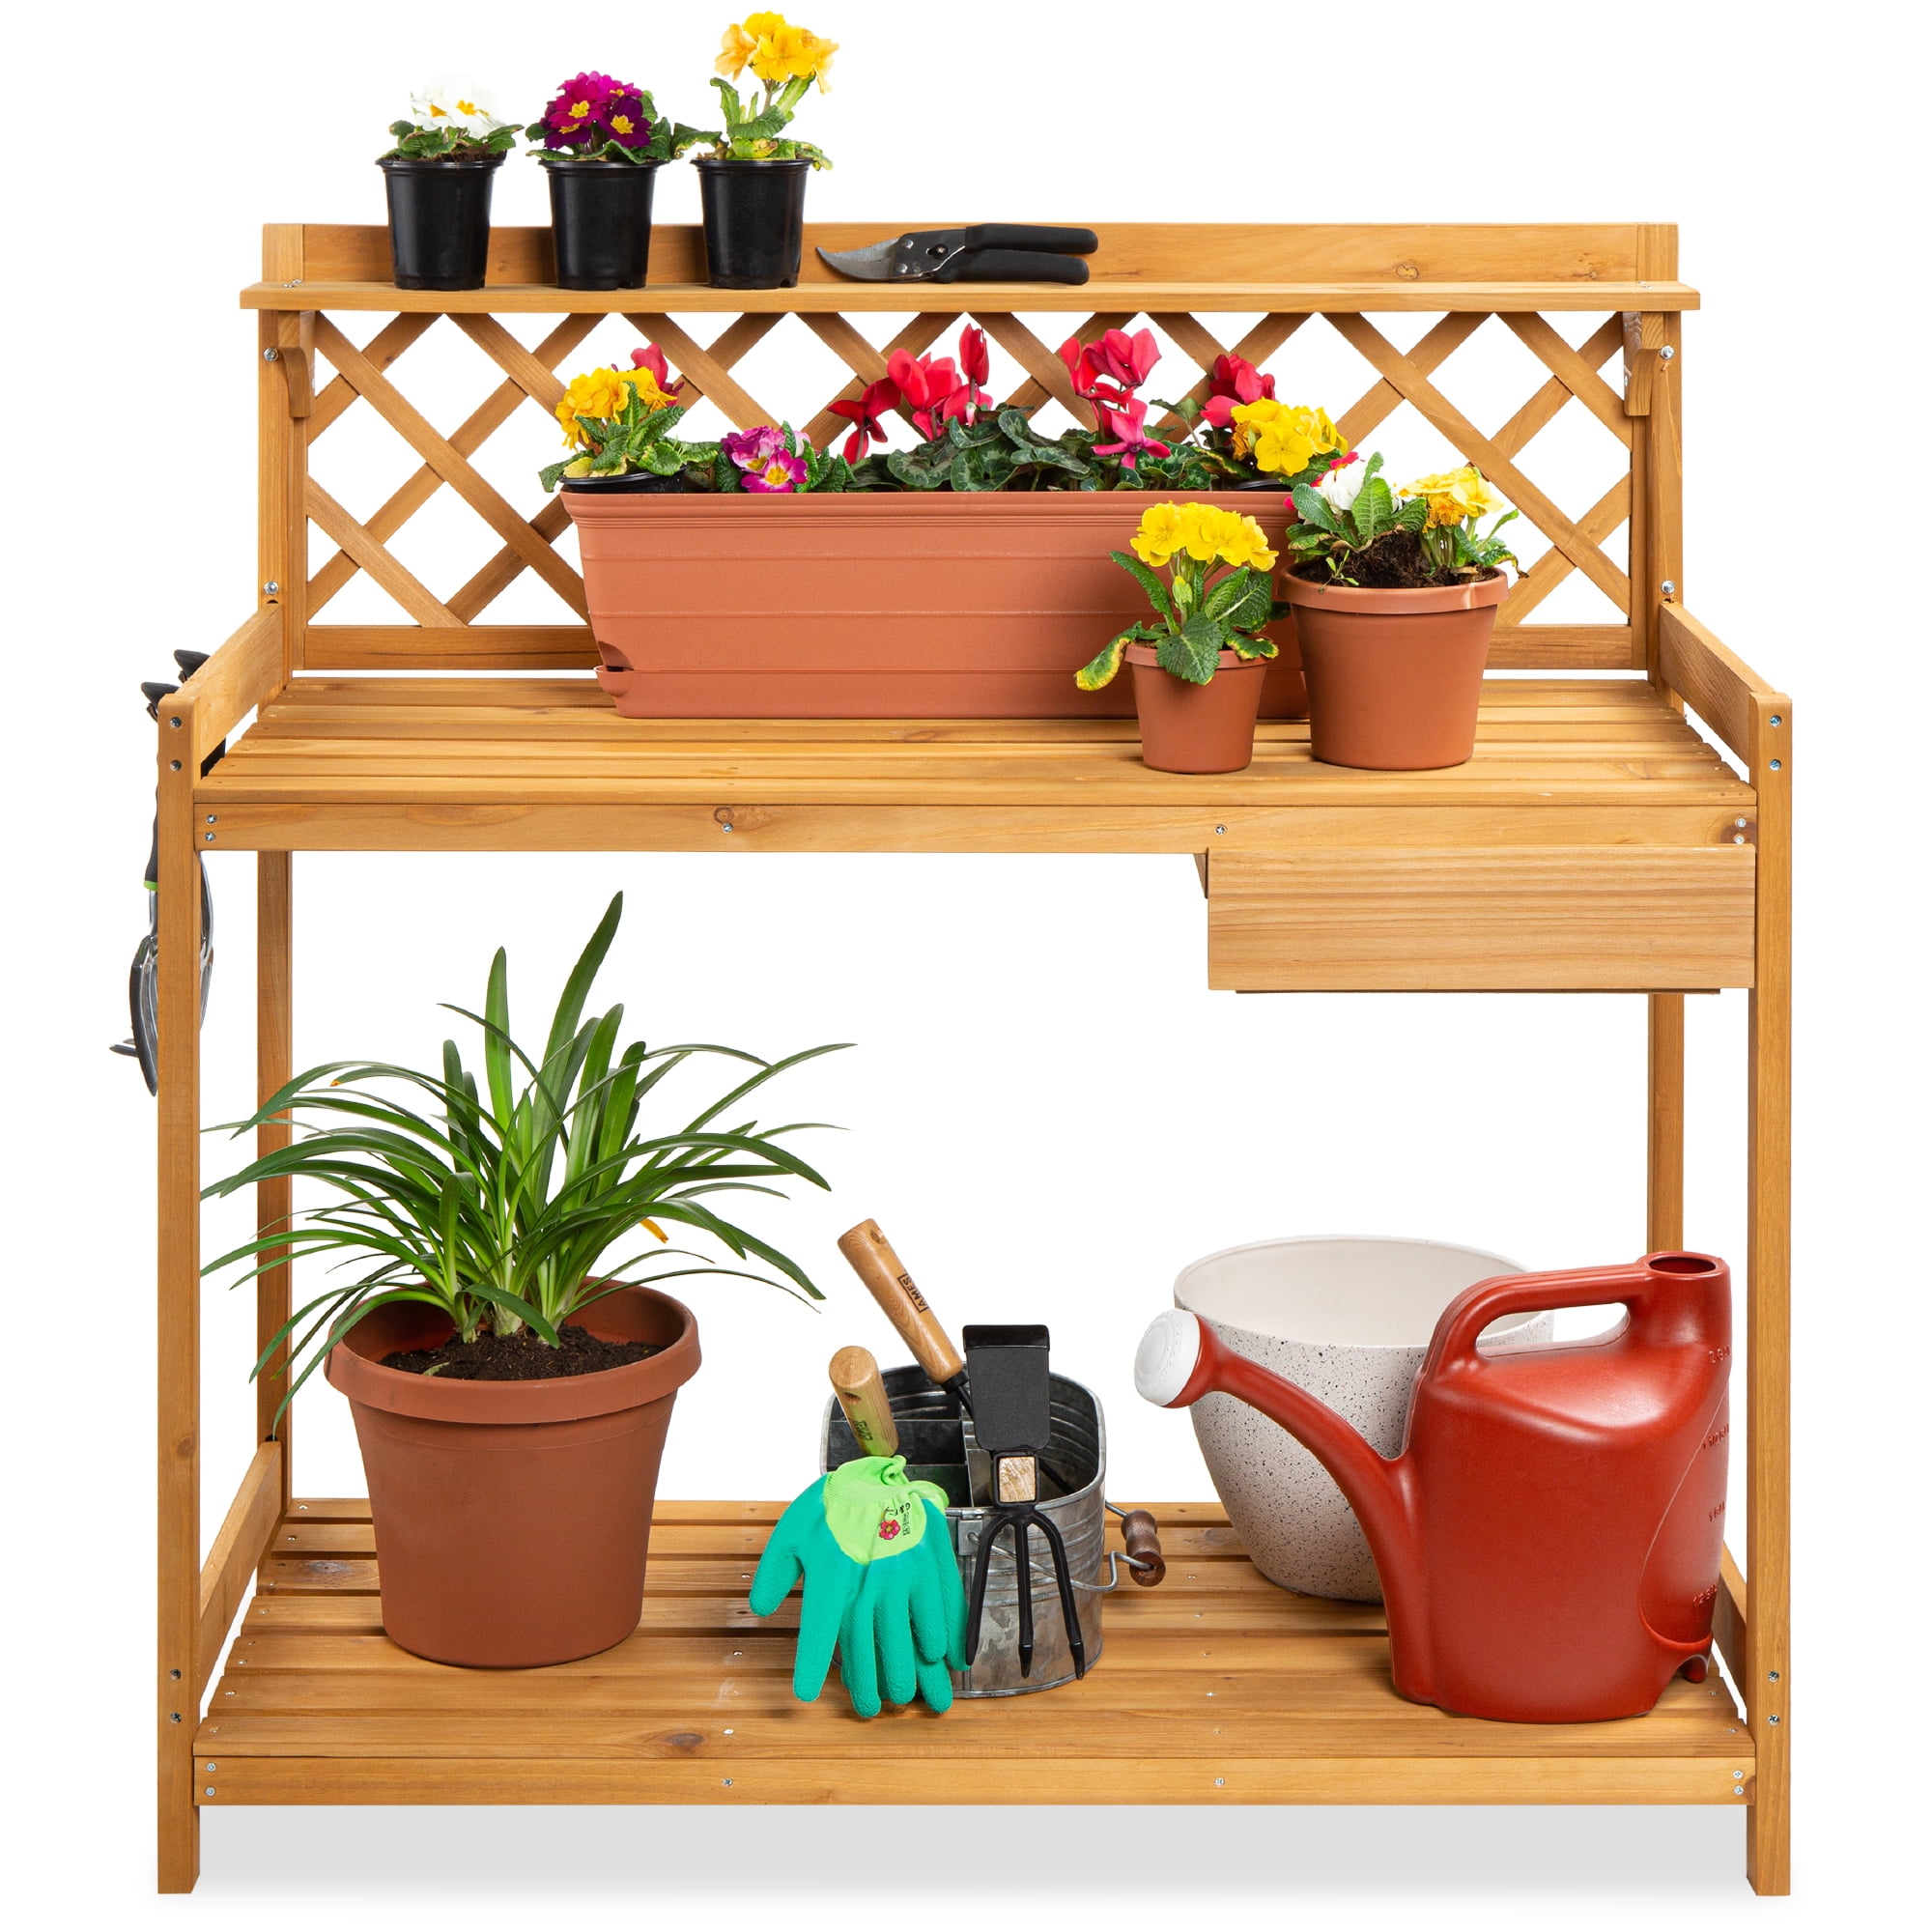 Painted Wooden Garden Plant Table Potting Bench Workstation with Storage 